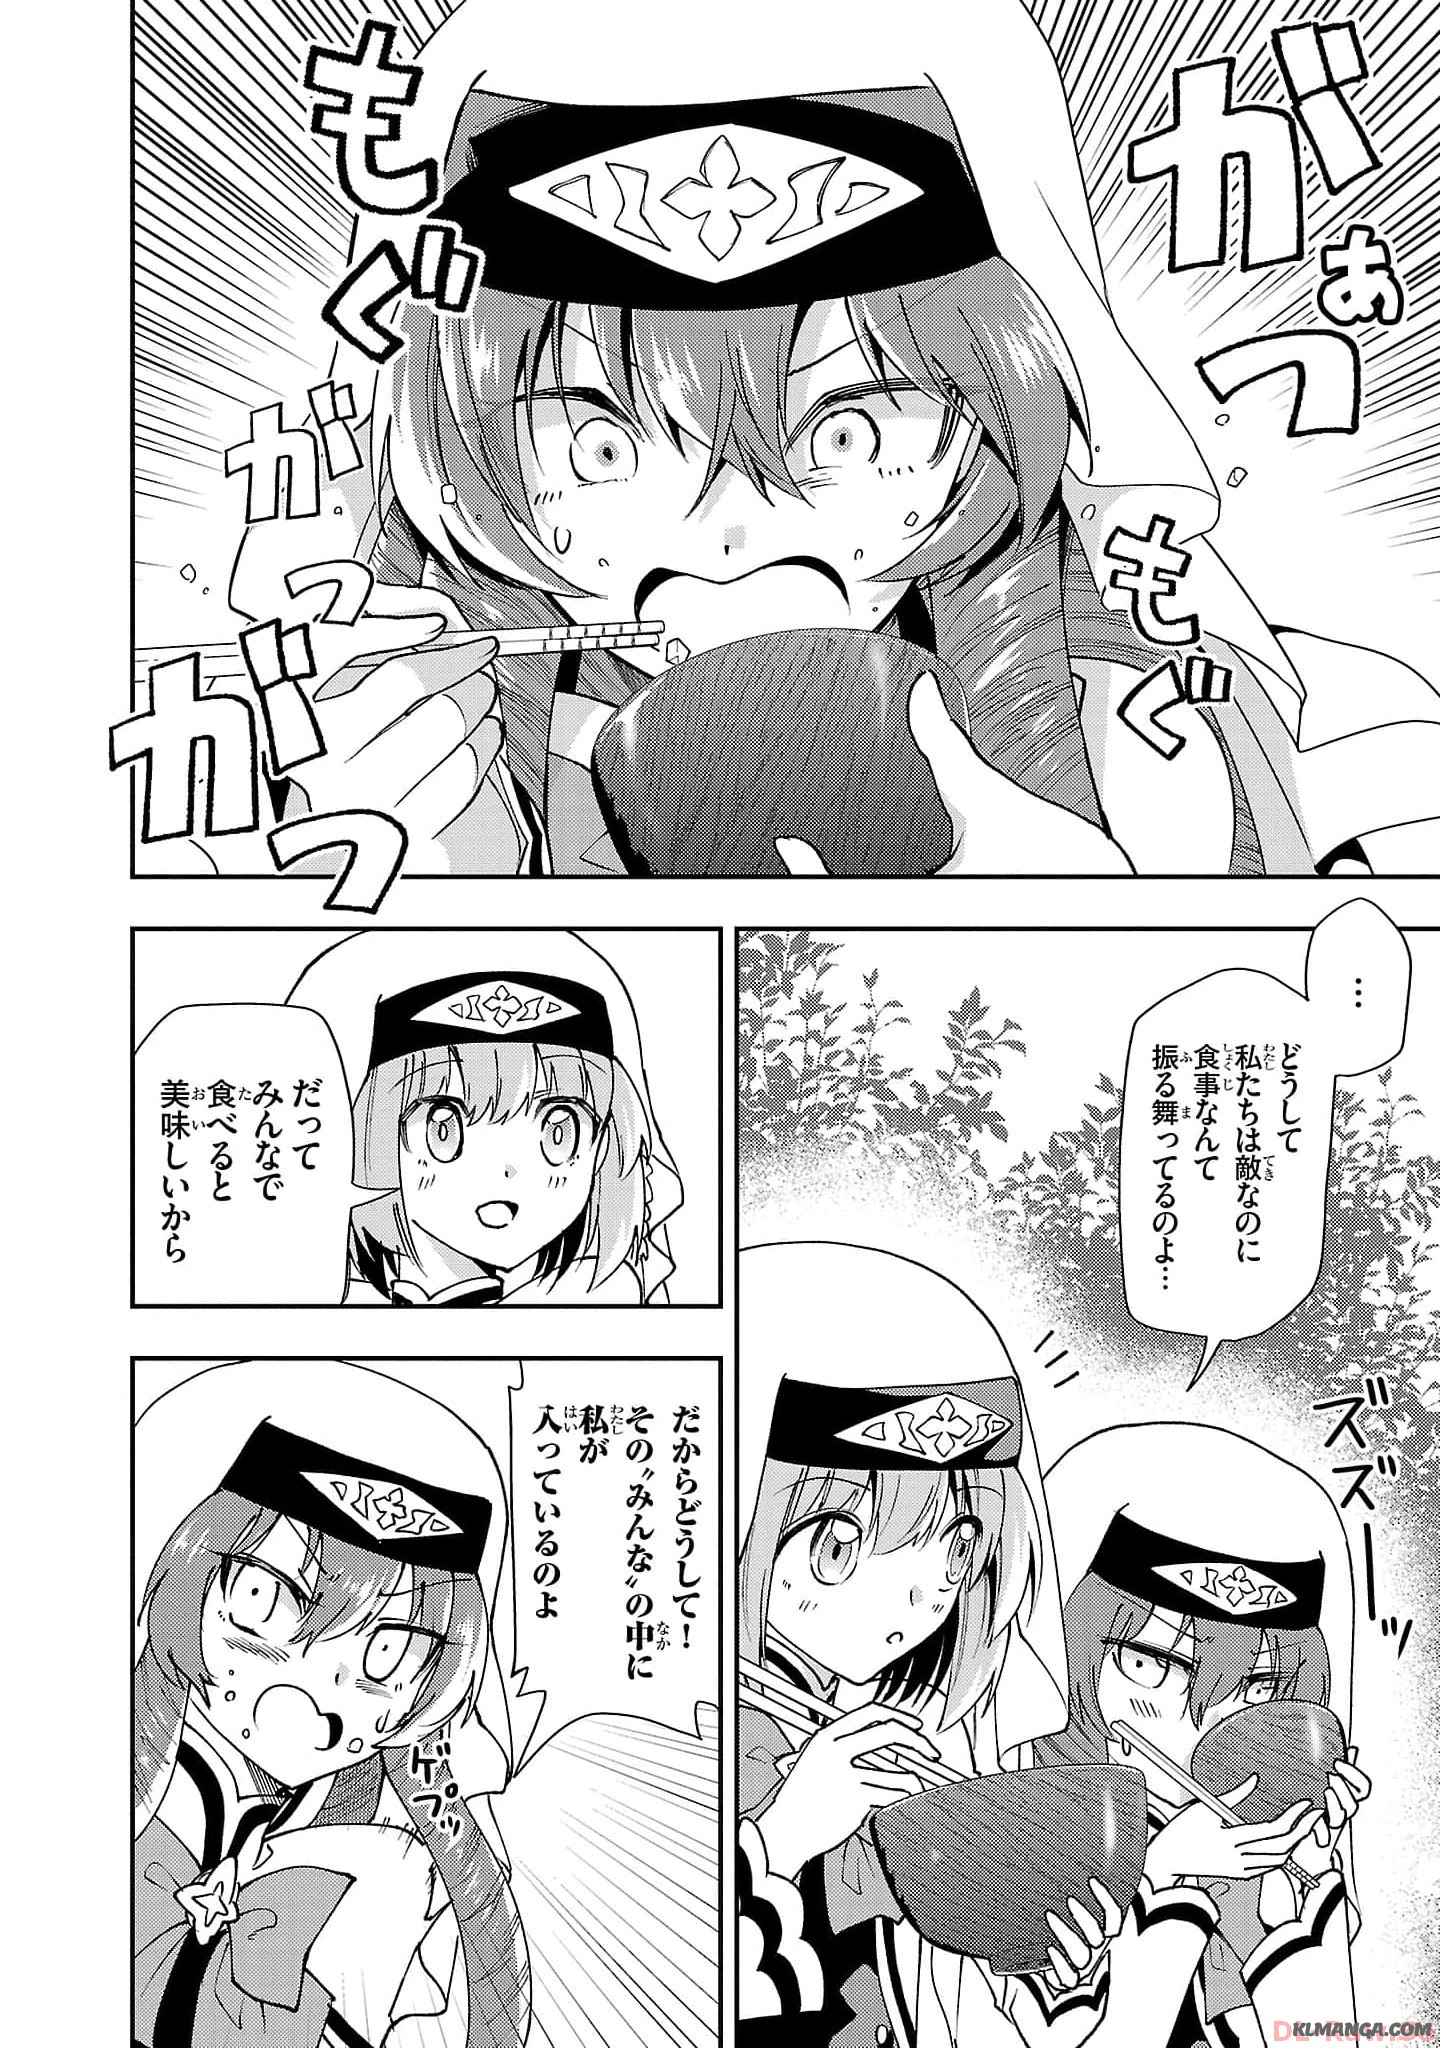 Hungry Saint and Full-Stomach Witch’s Slow Life in Another World! 腹ペコ聖女とまんぷく魔女の異世界スローライフ! 第22話 - Page 18